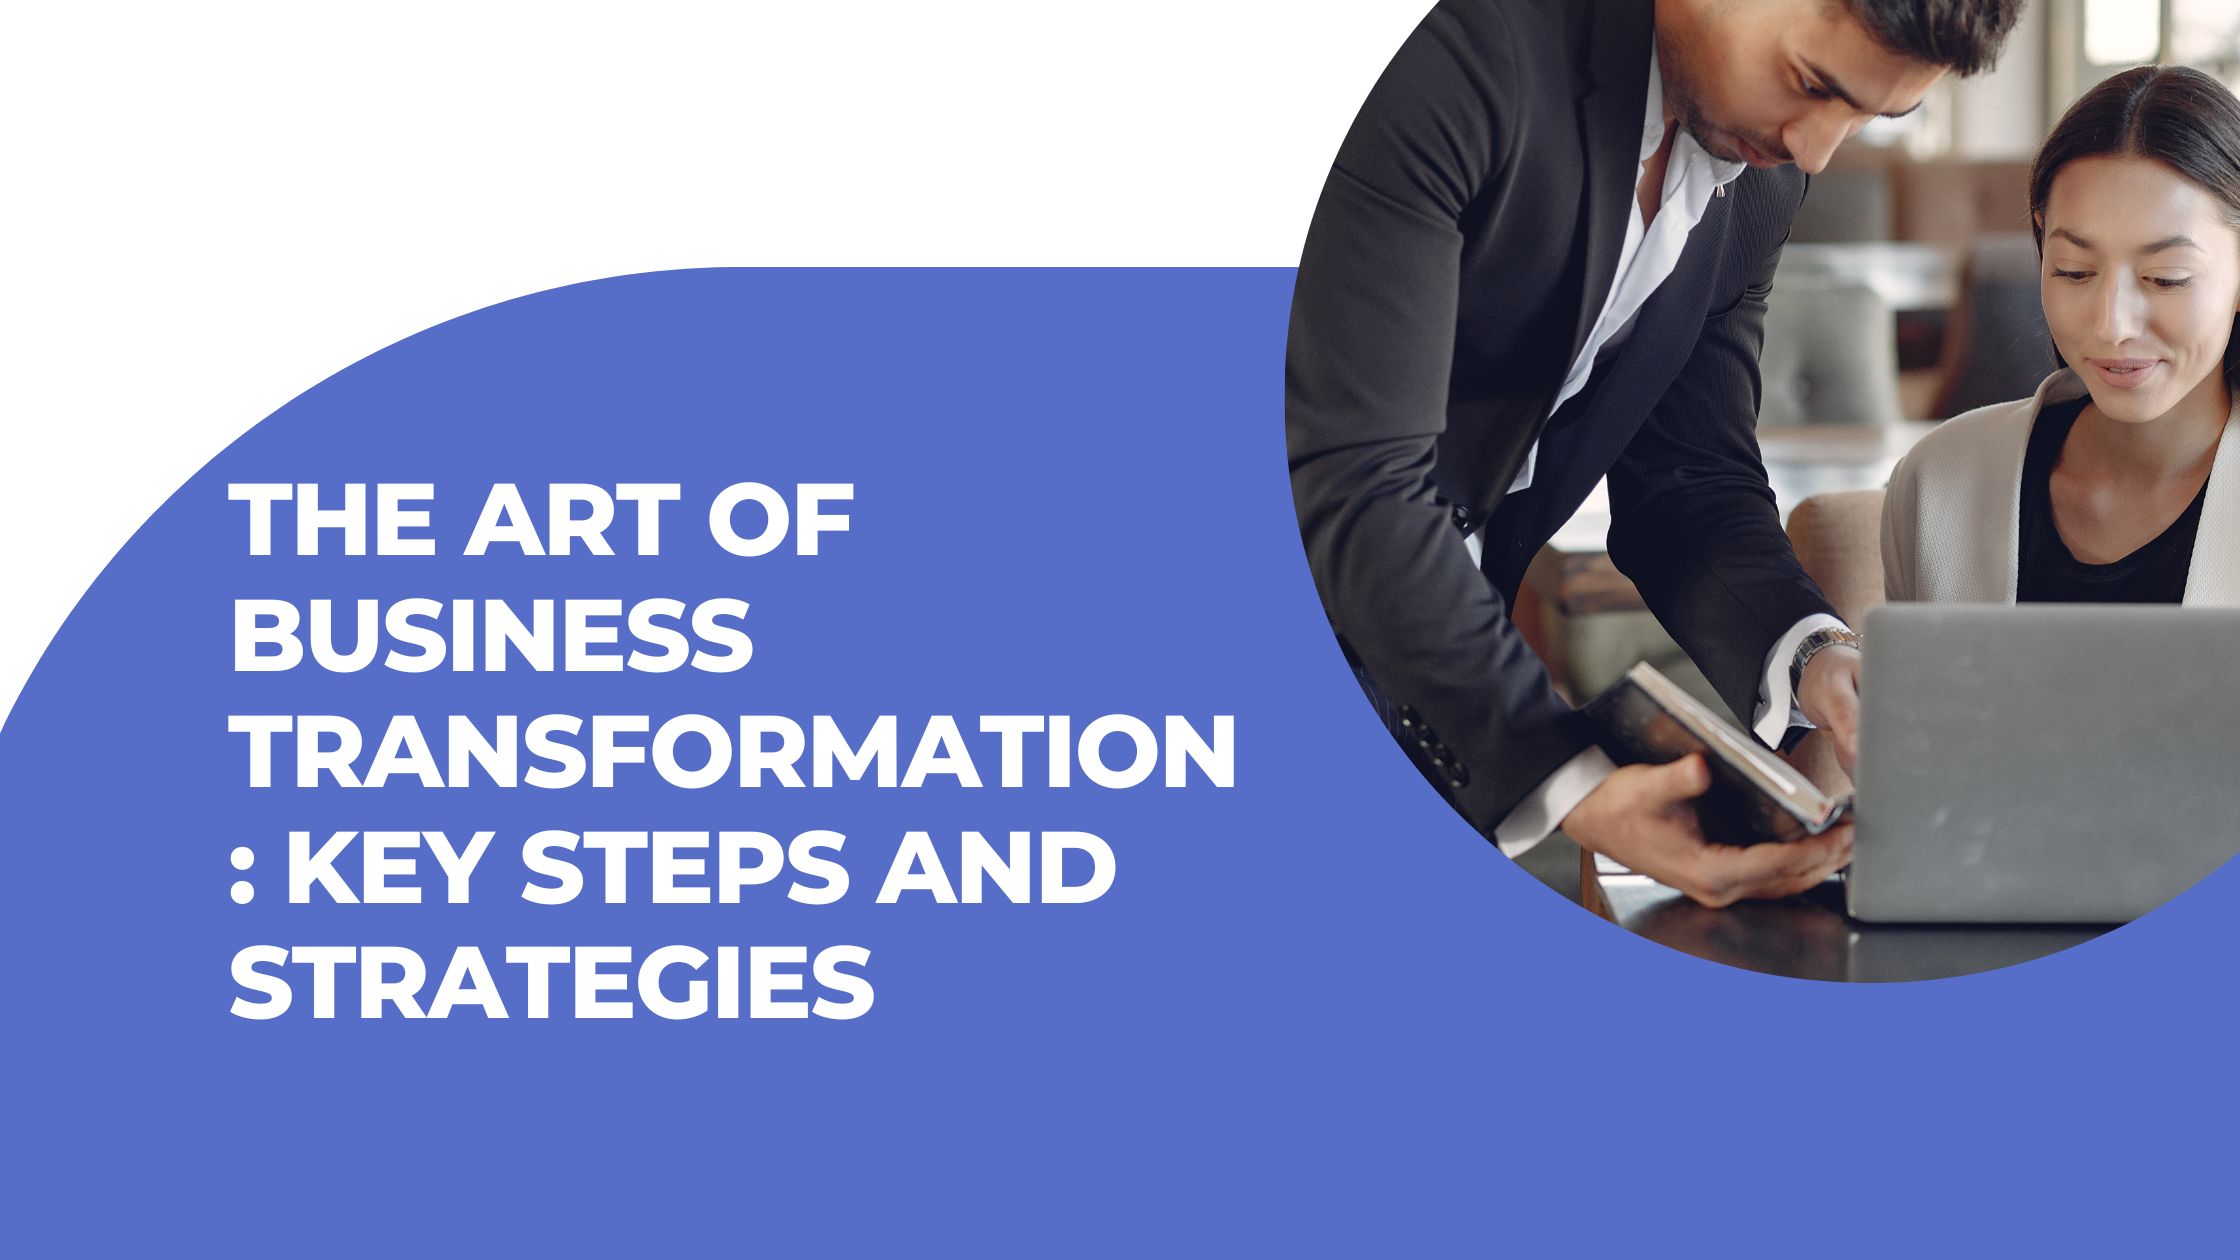 The Art of Business Transformation Key Steps and Strategies